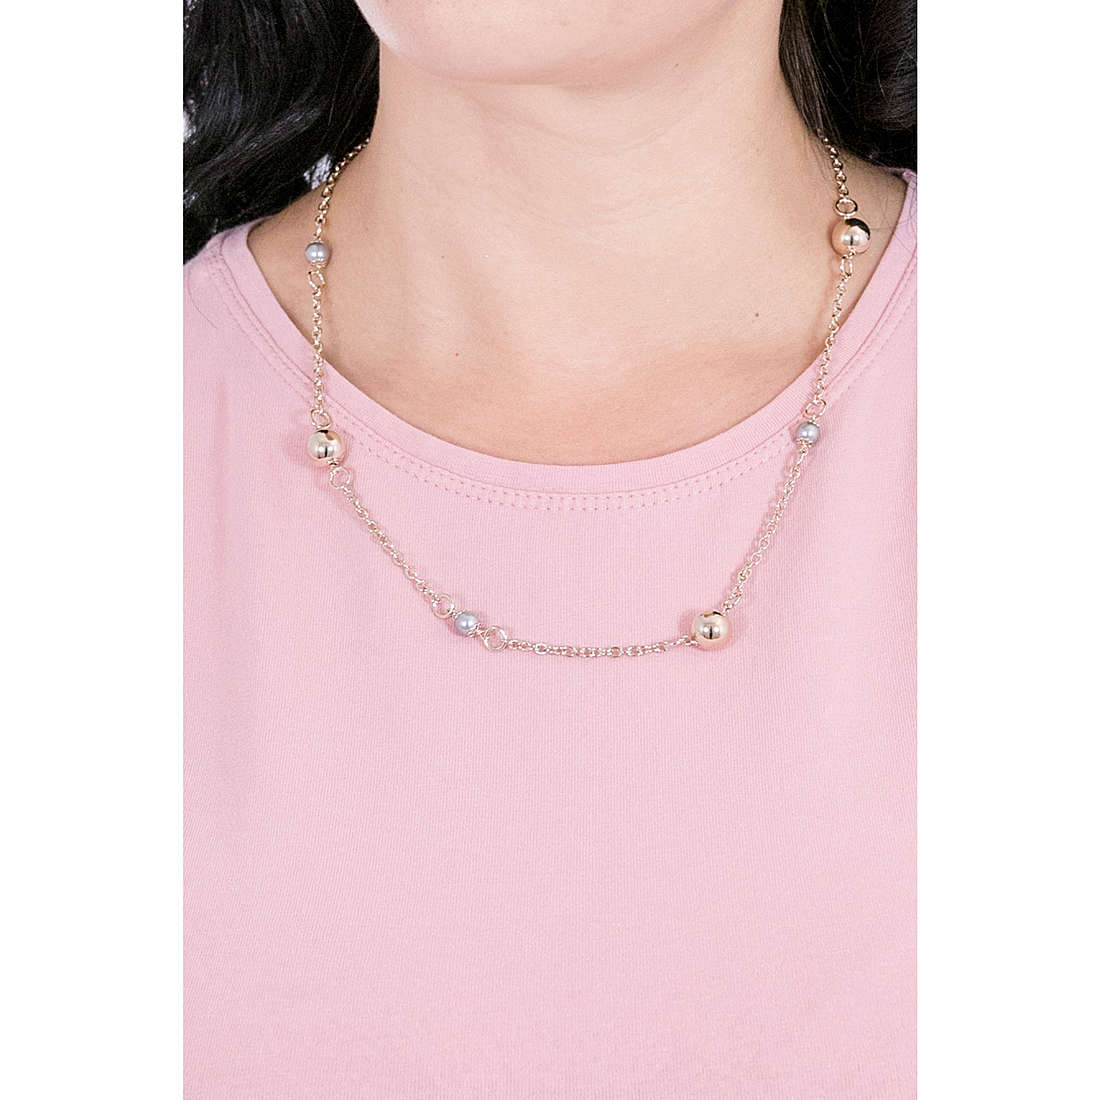 4US Cesare Paciotti necklaces Grey woman 4UCL2580W wearing